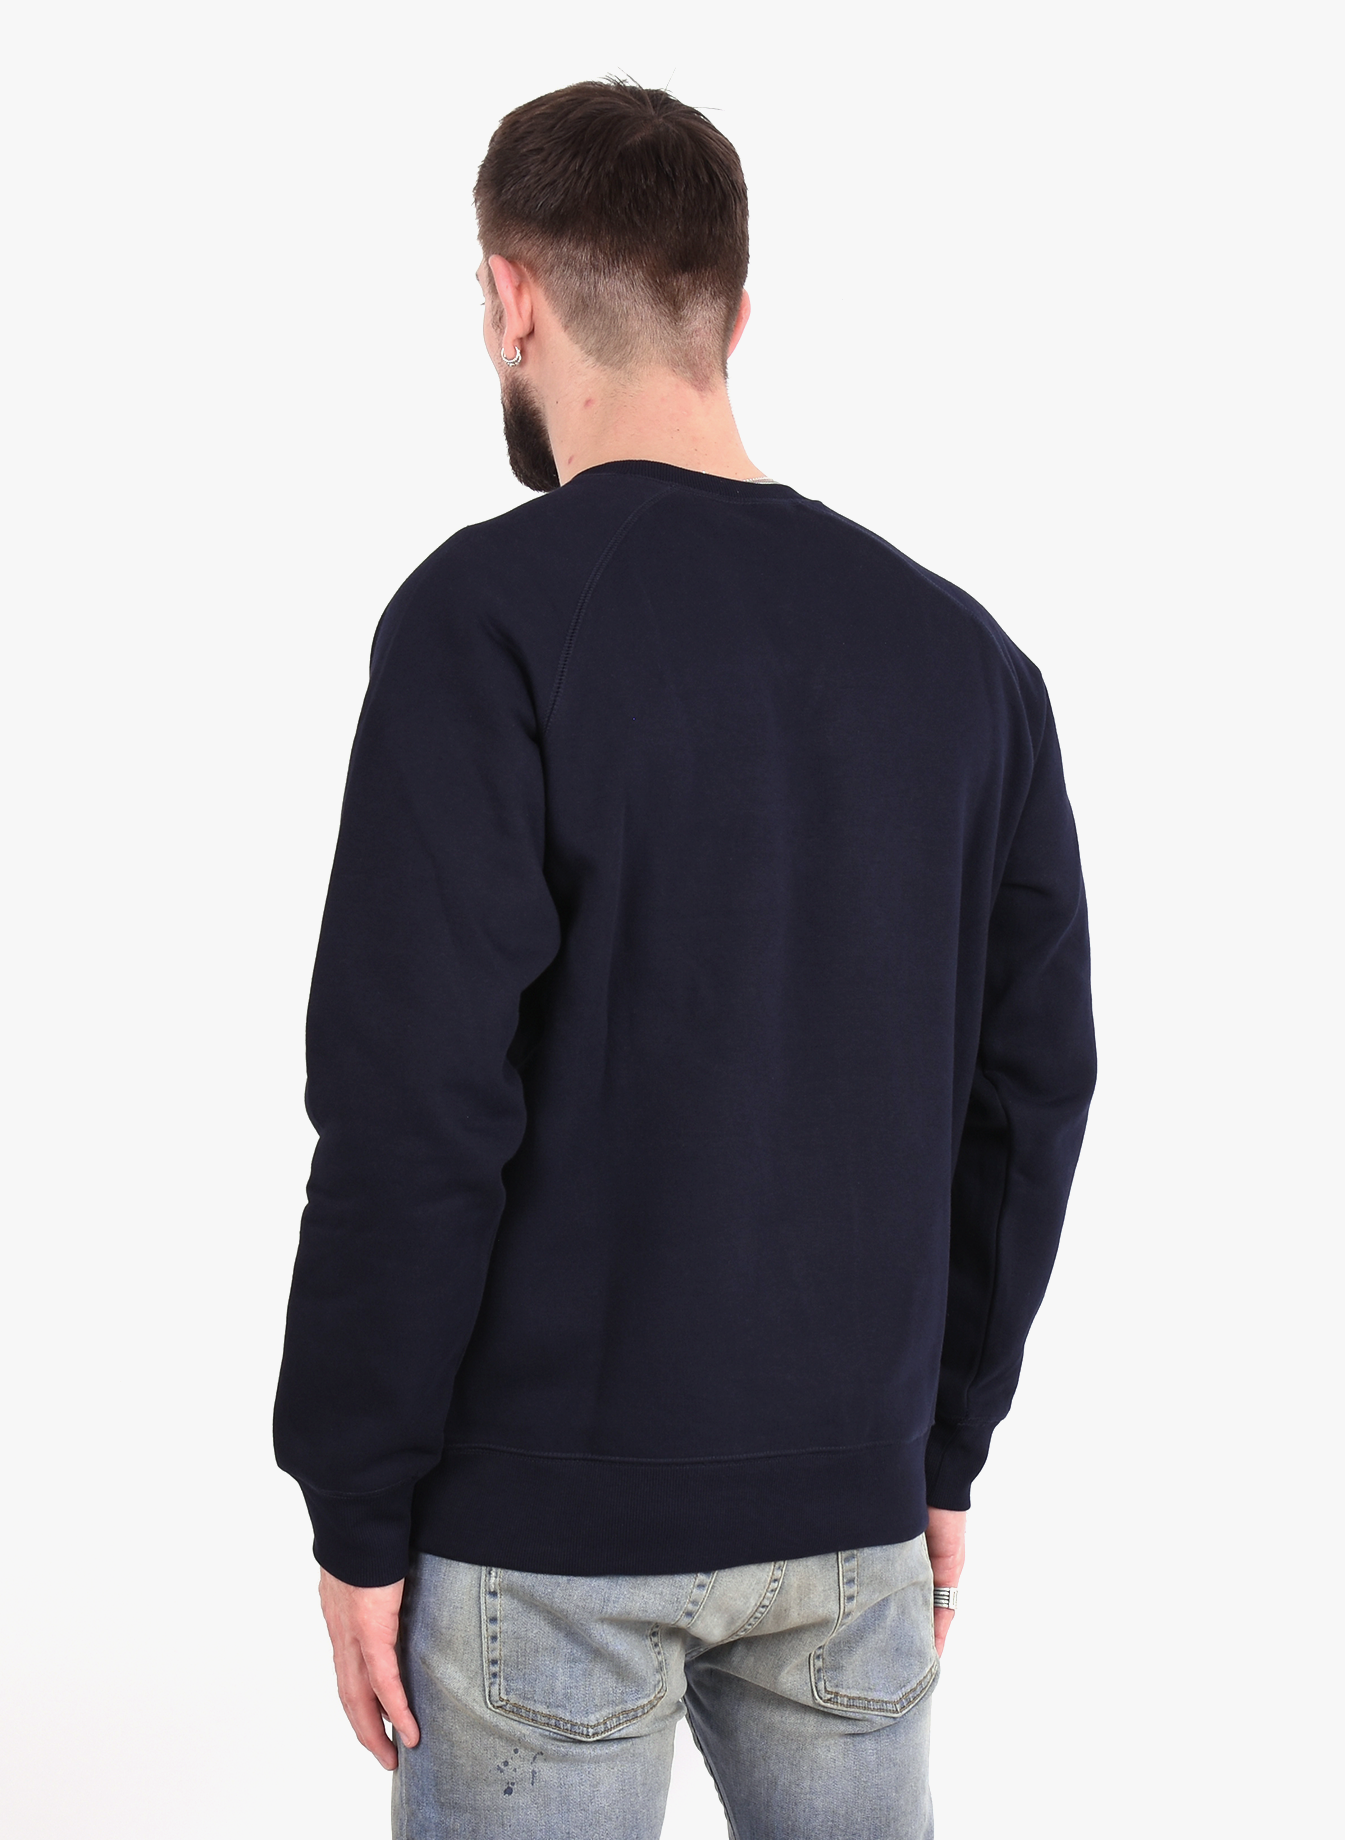 Carhartt WIP 'Chase' Sweater Blue Gold - Mensquare